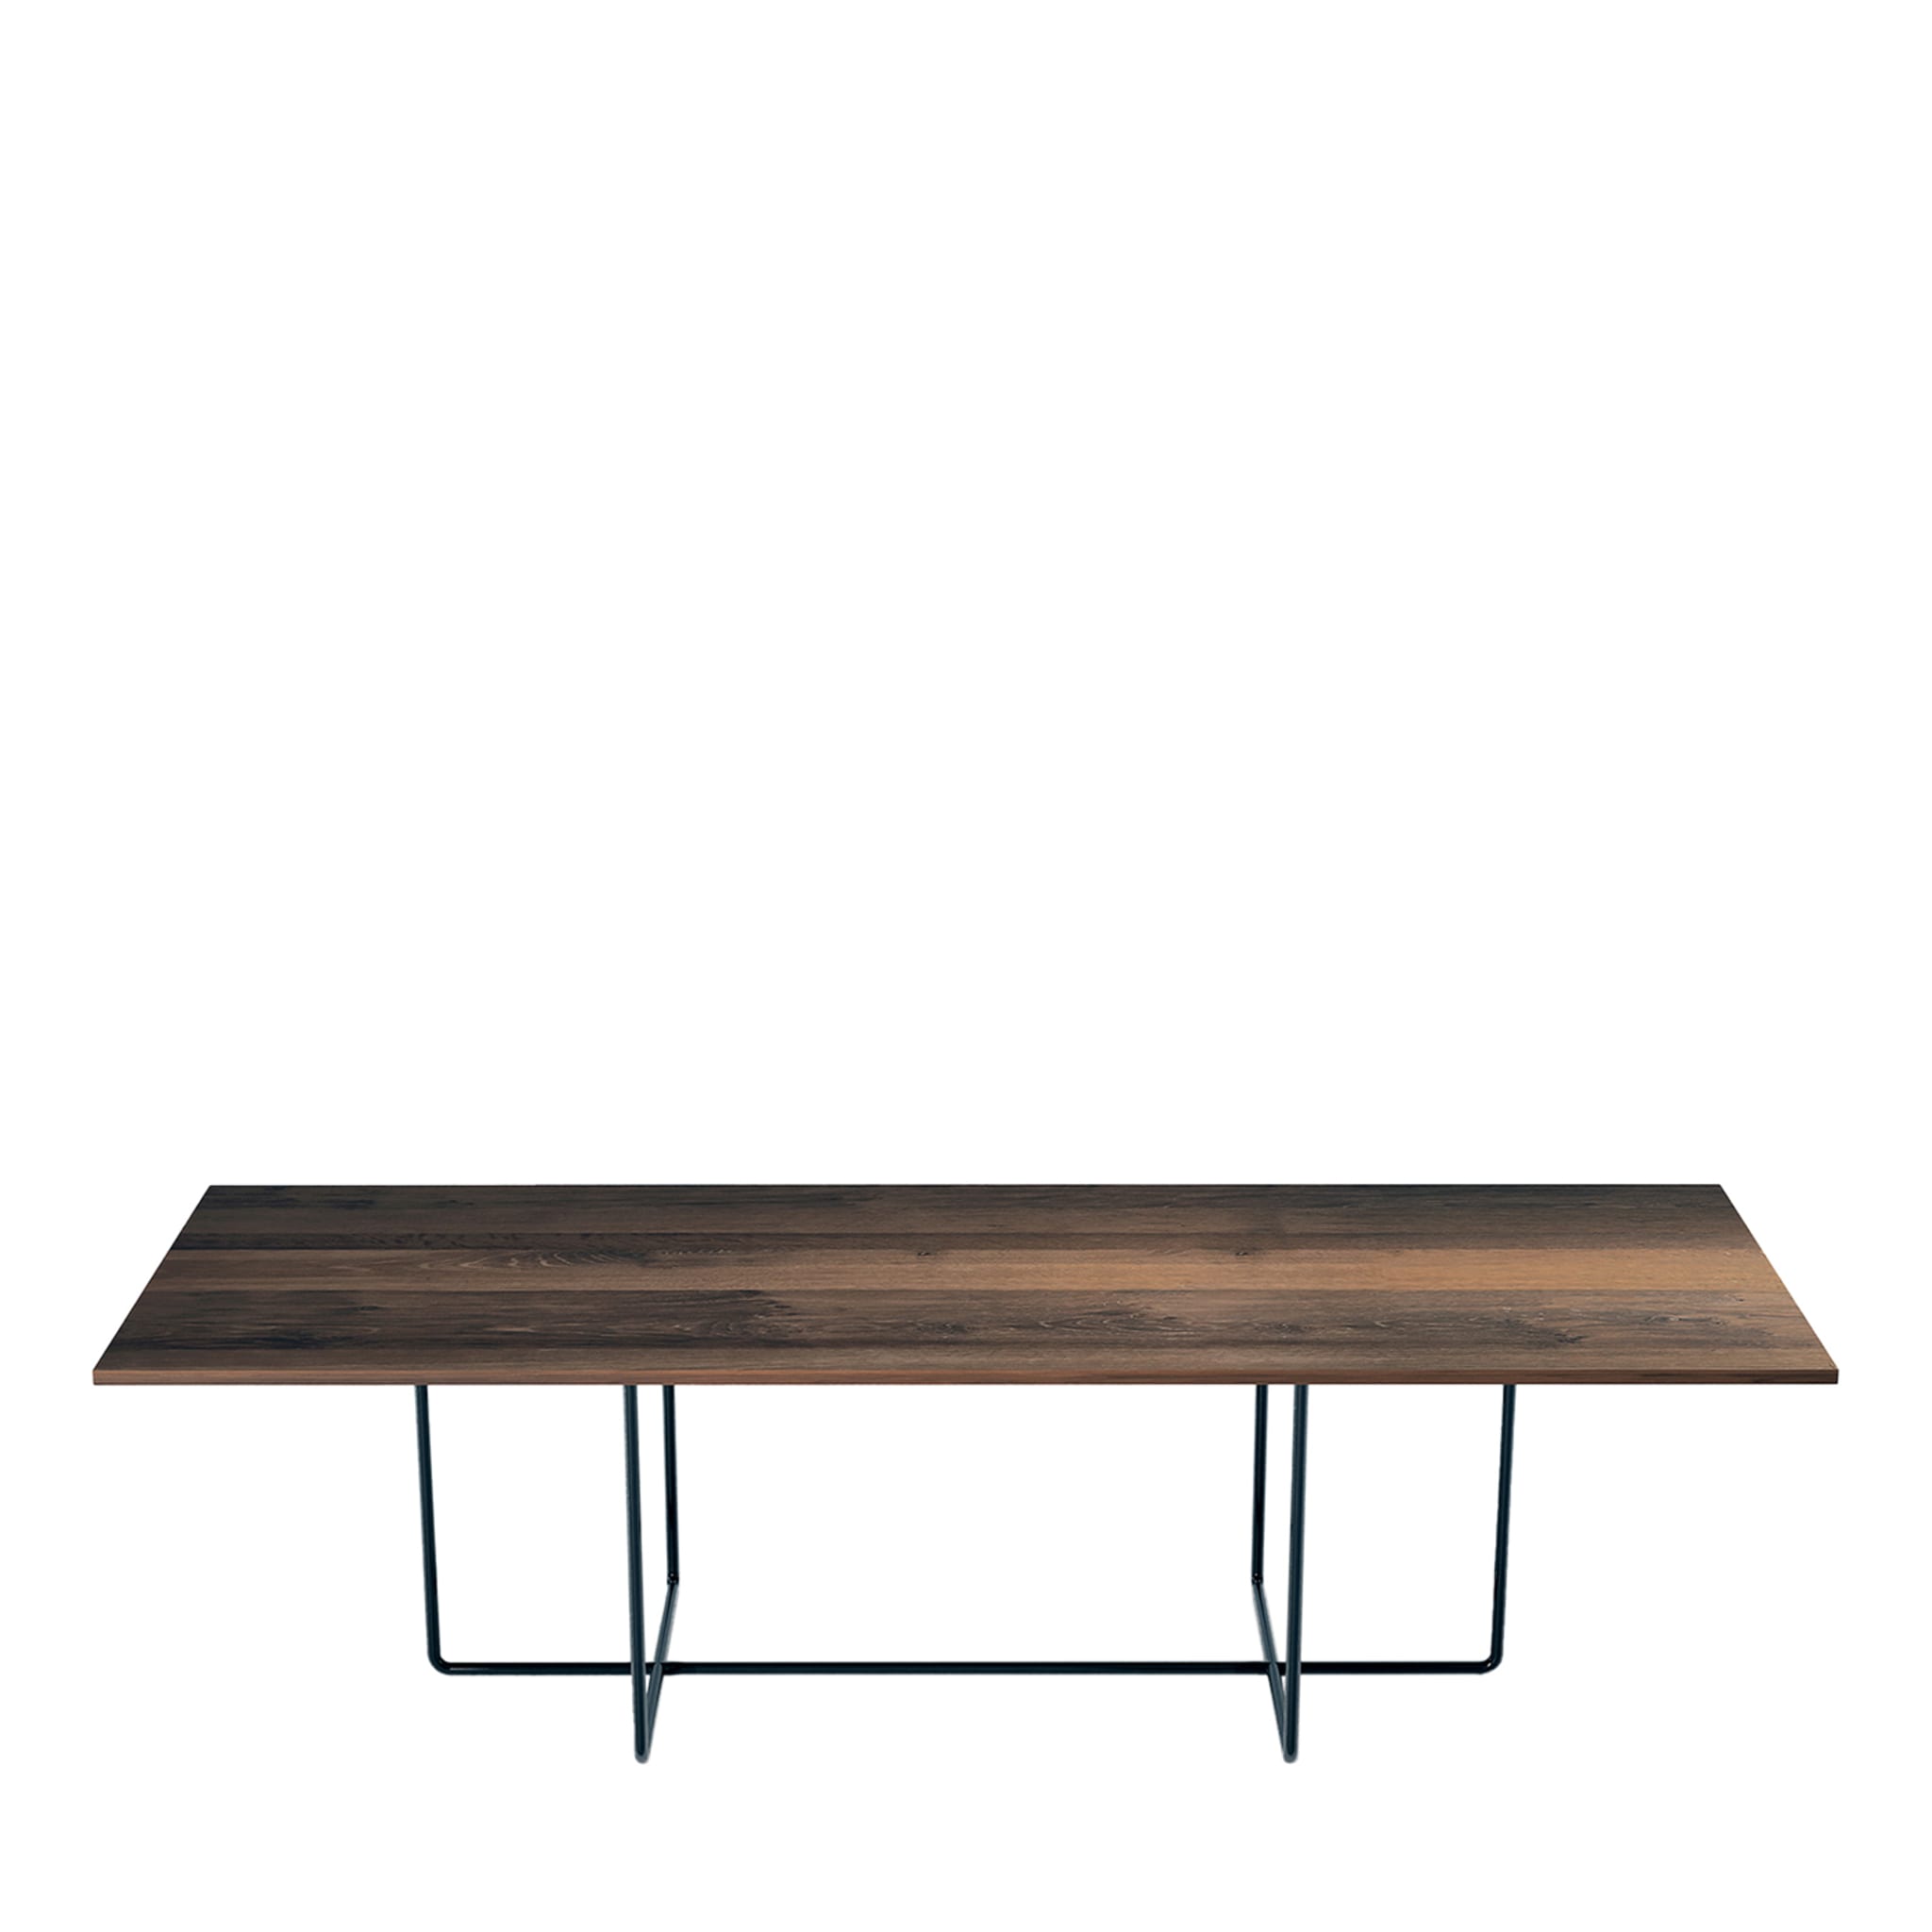 002.09 XP 260 Material Oak Dining Table - Main view